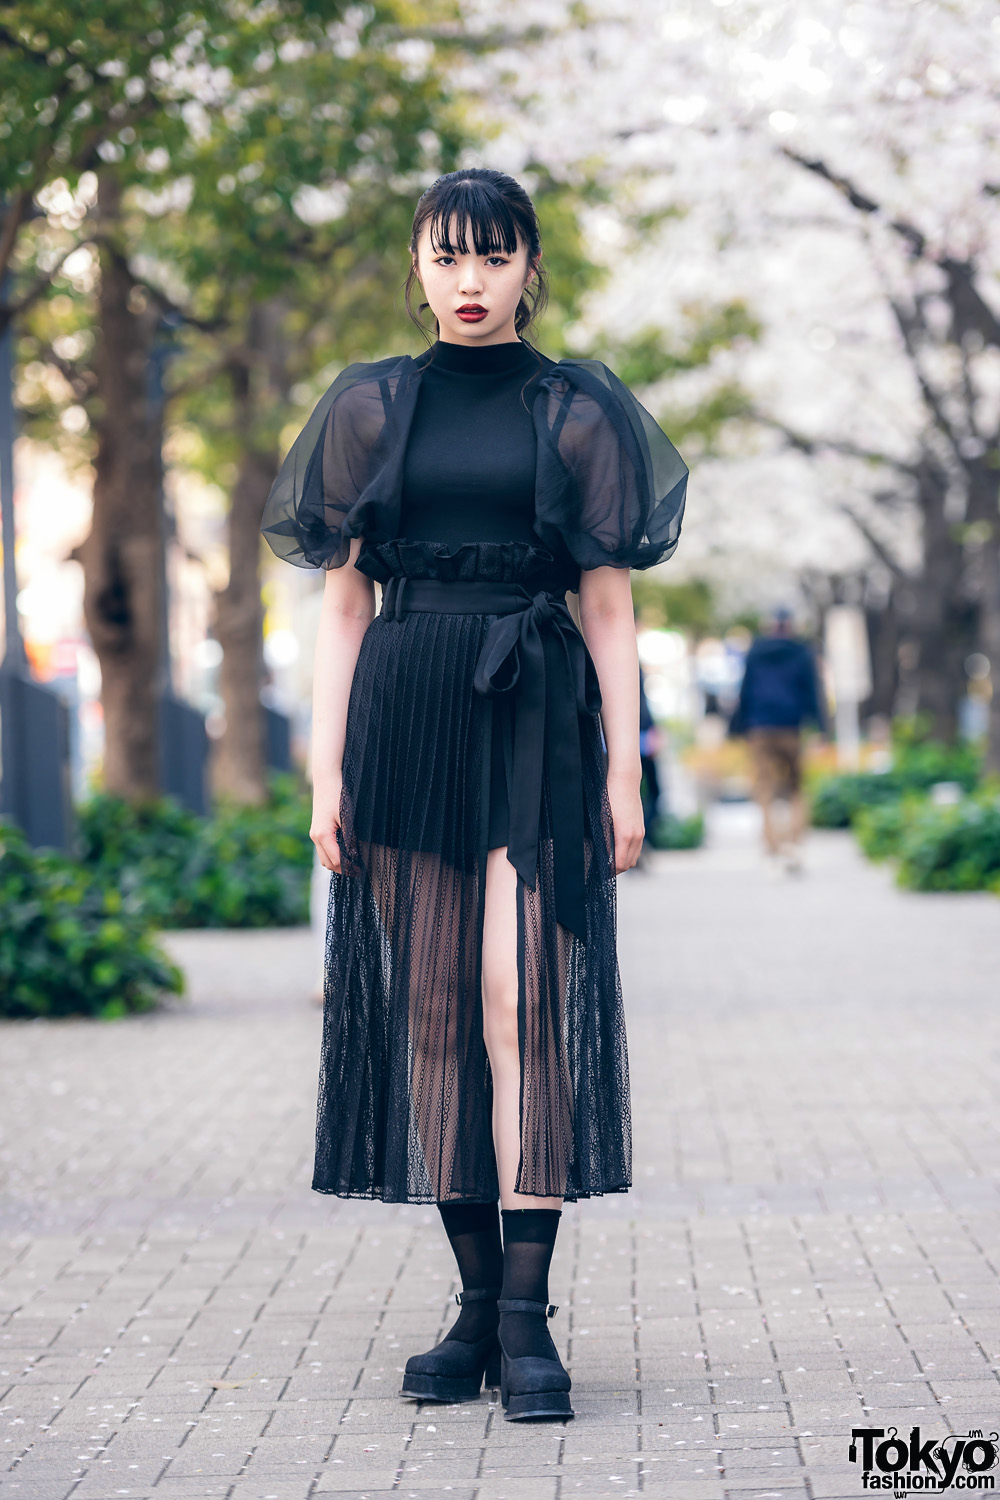 Japanese Model in Chic All Black Streetwear Style w/ Snidel Puff Sleeve Sheer Pleated Dress & Office Kiko Baby Doll Shoes